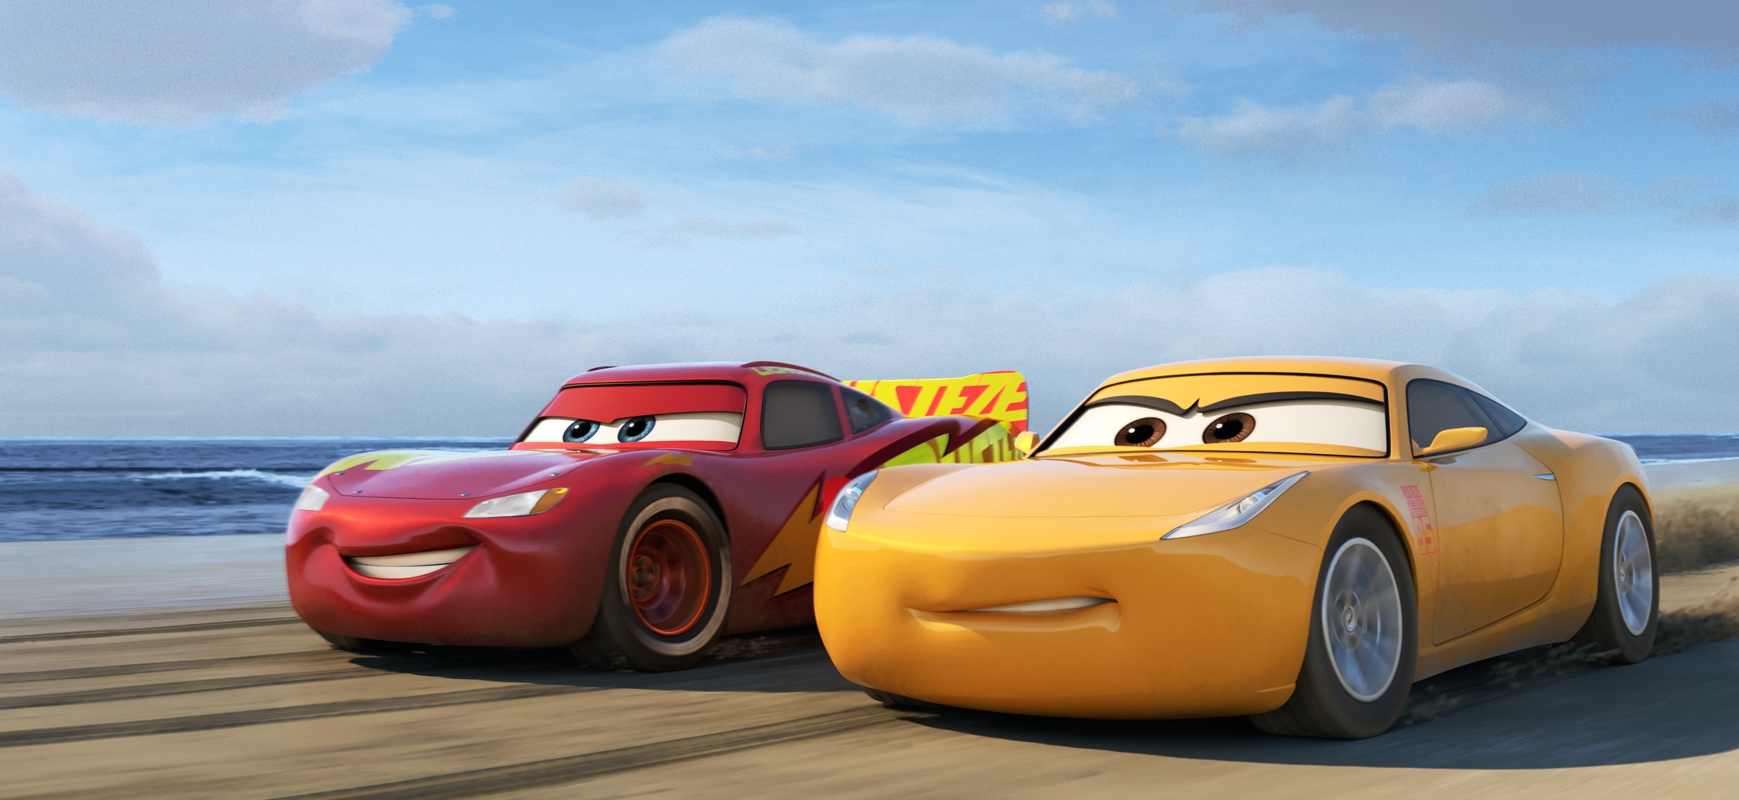 Lightning McQueen (voiced by Owen Wilson) and the new challenger on the block Cruz Ramirez (voiced by Cristela Alonzo) in Cars 3 (2017)